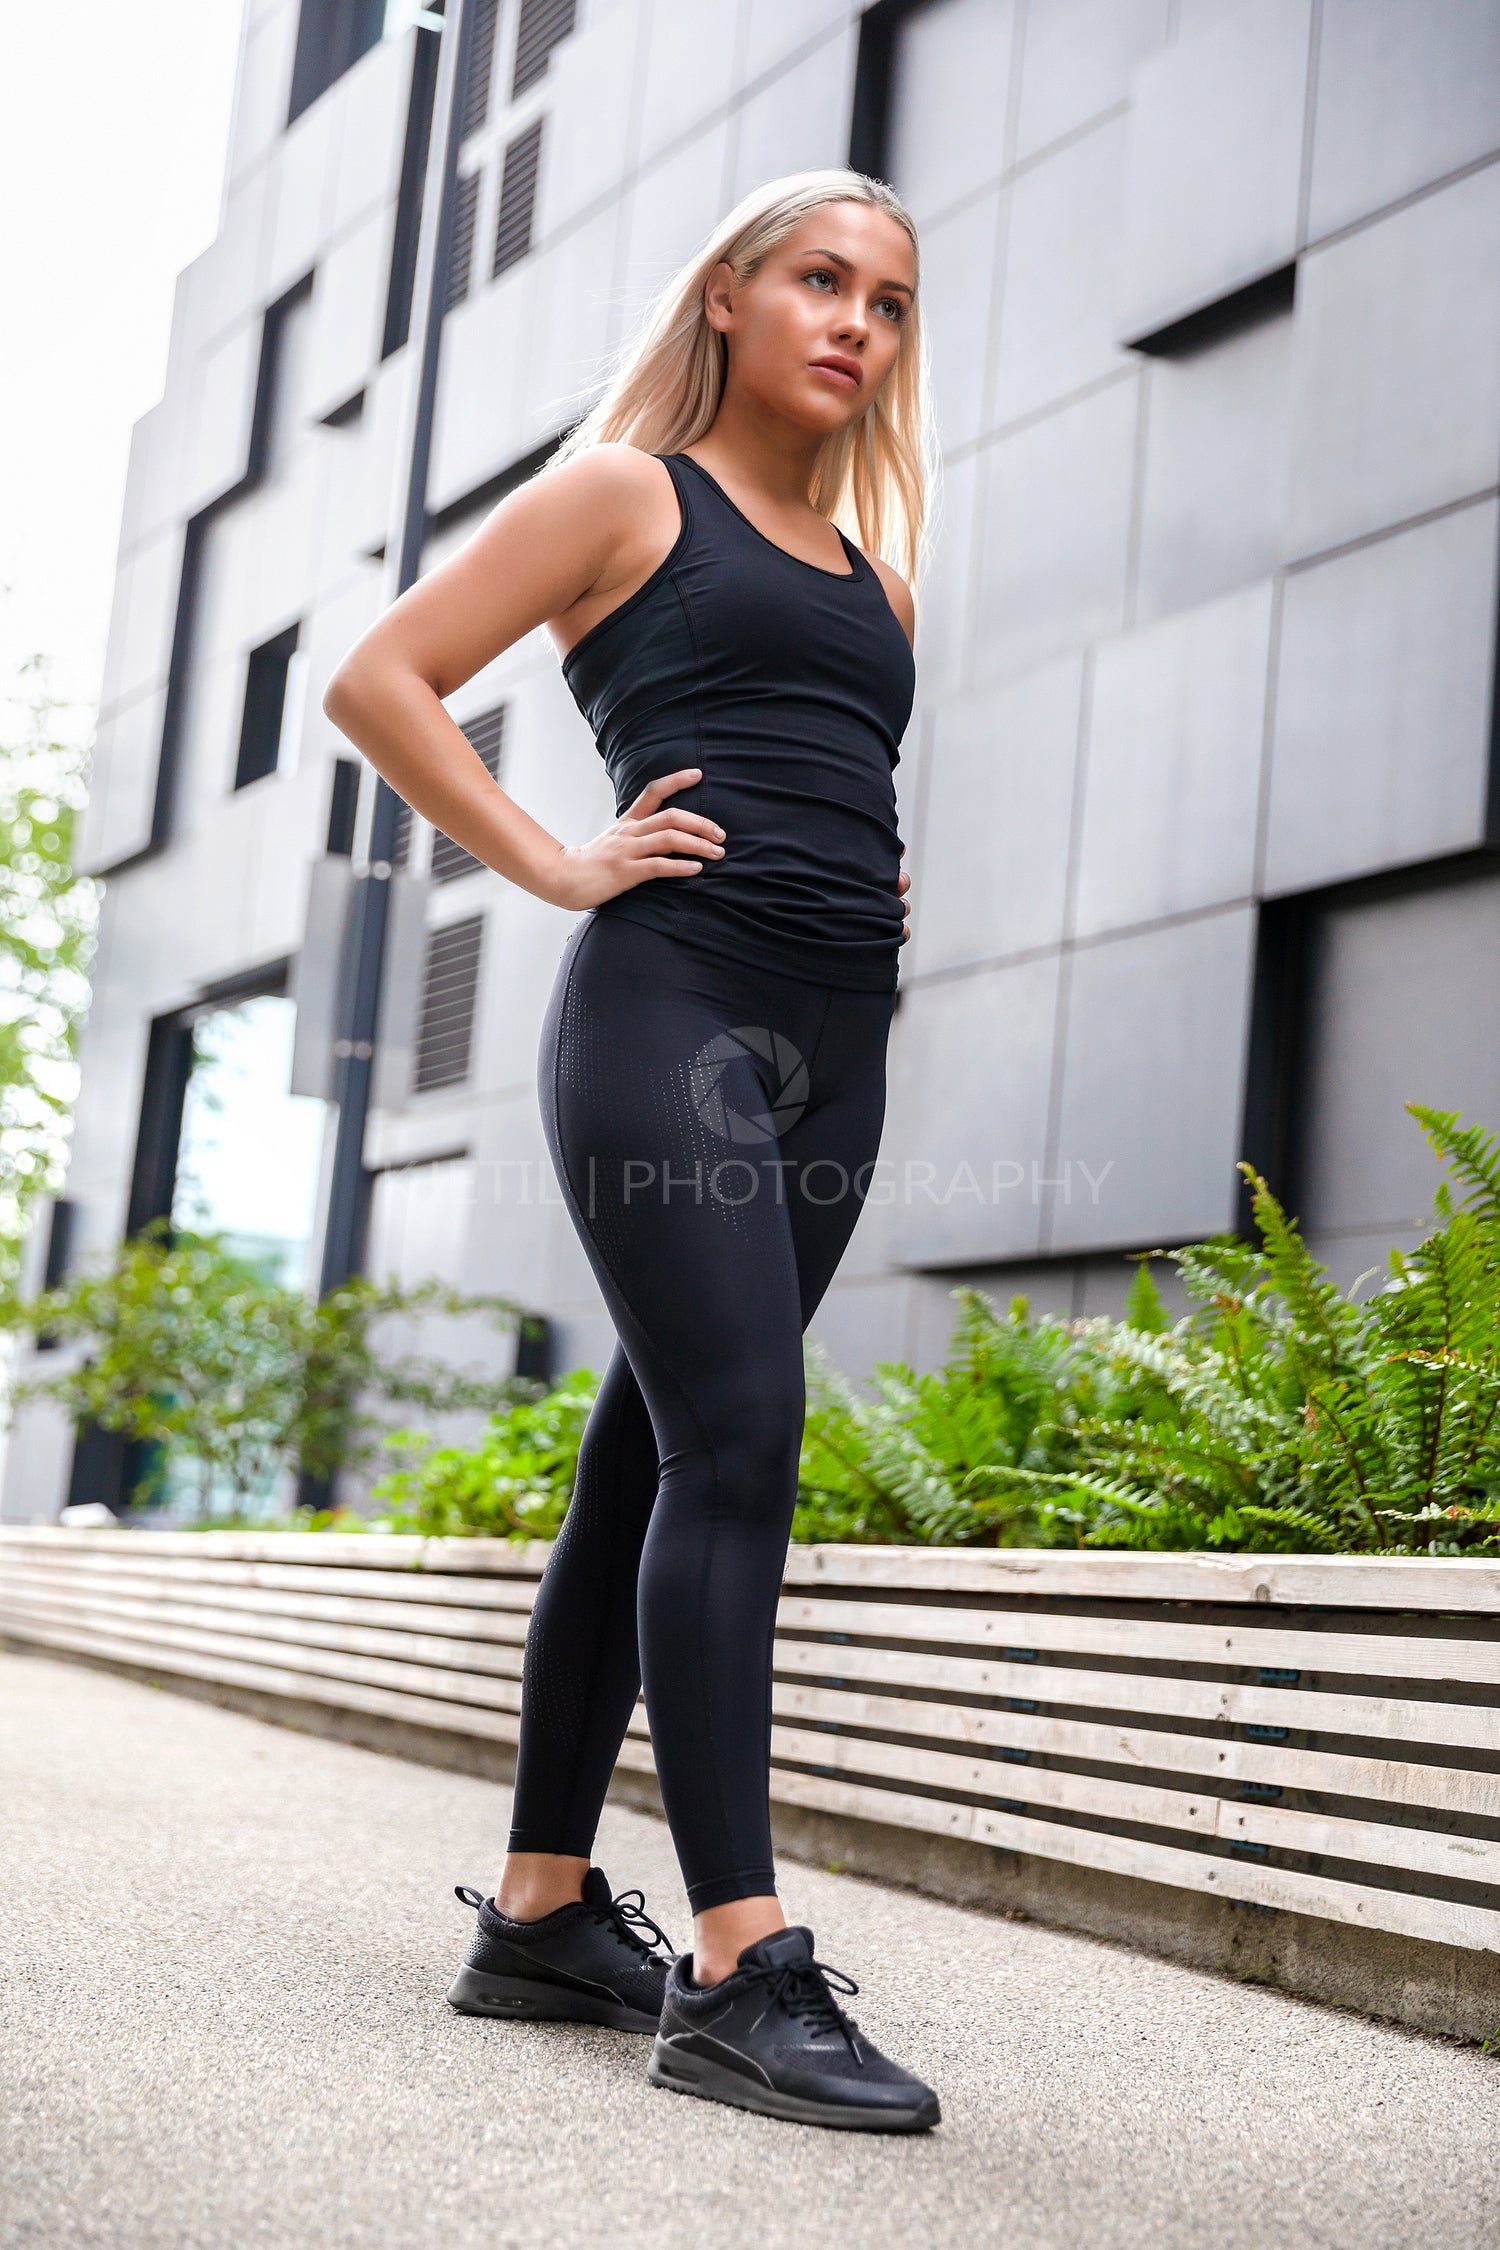 Confident Attractive Athletic Woman Standing Against Building In City